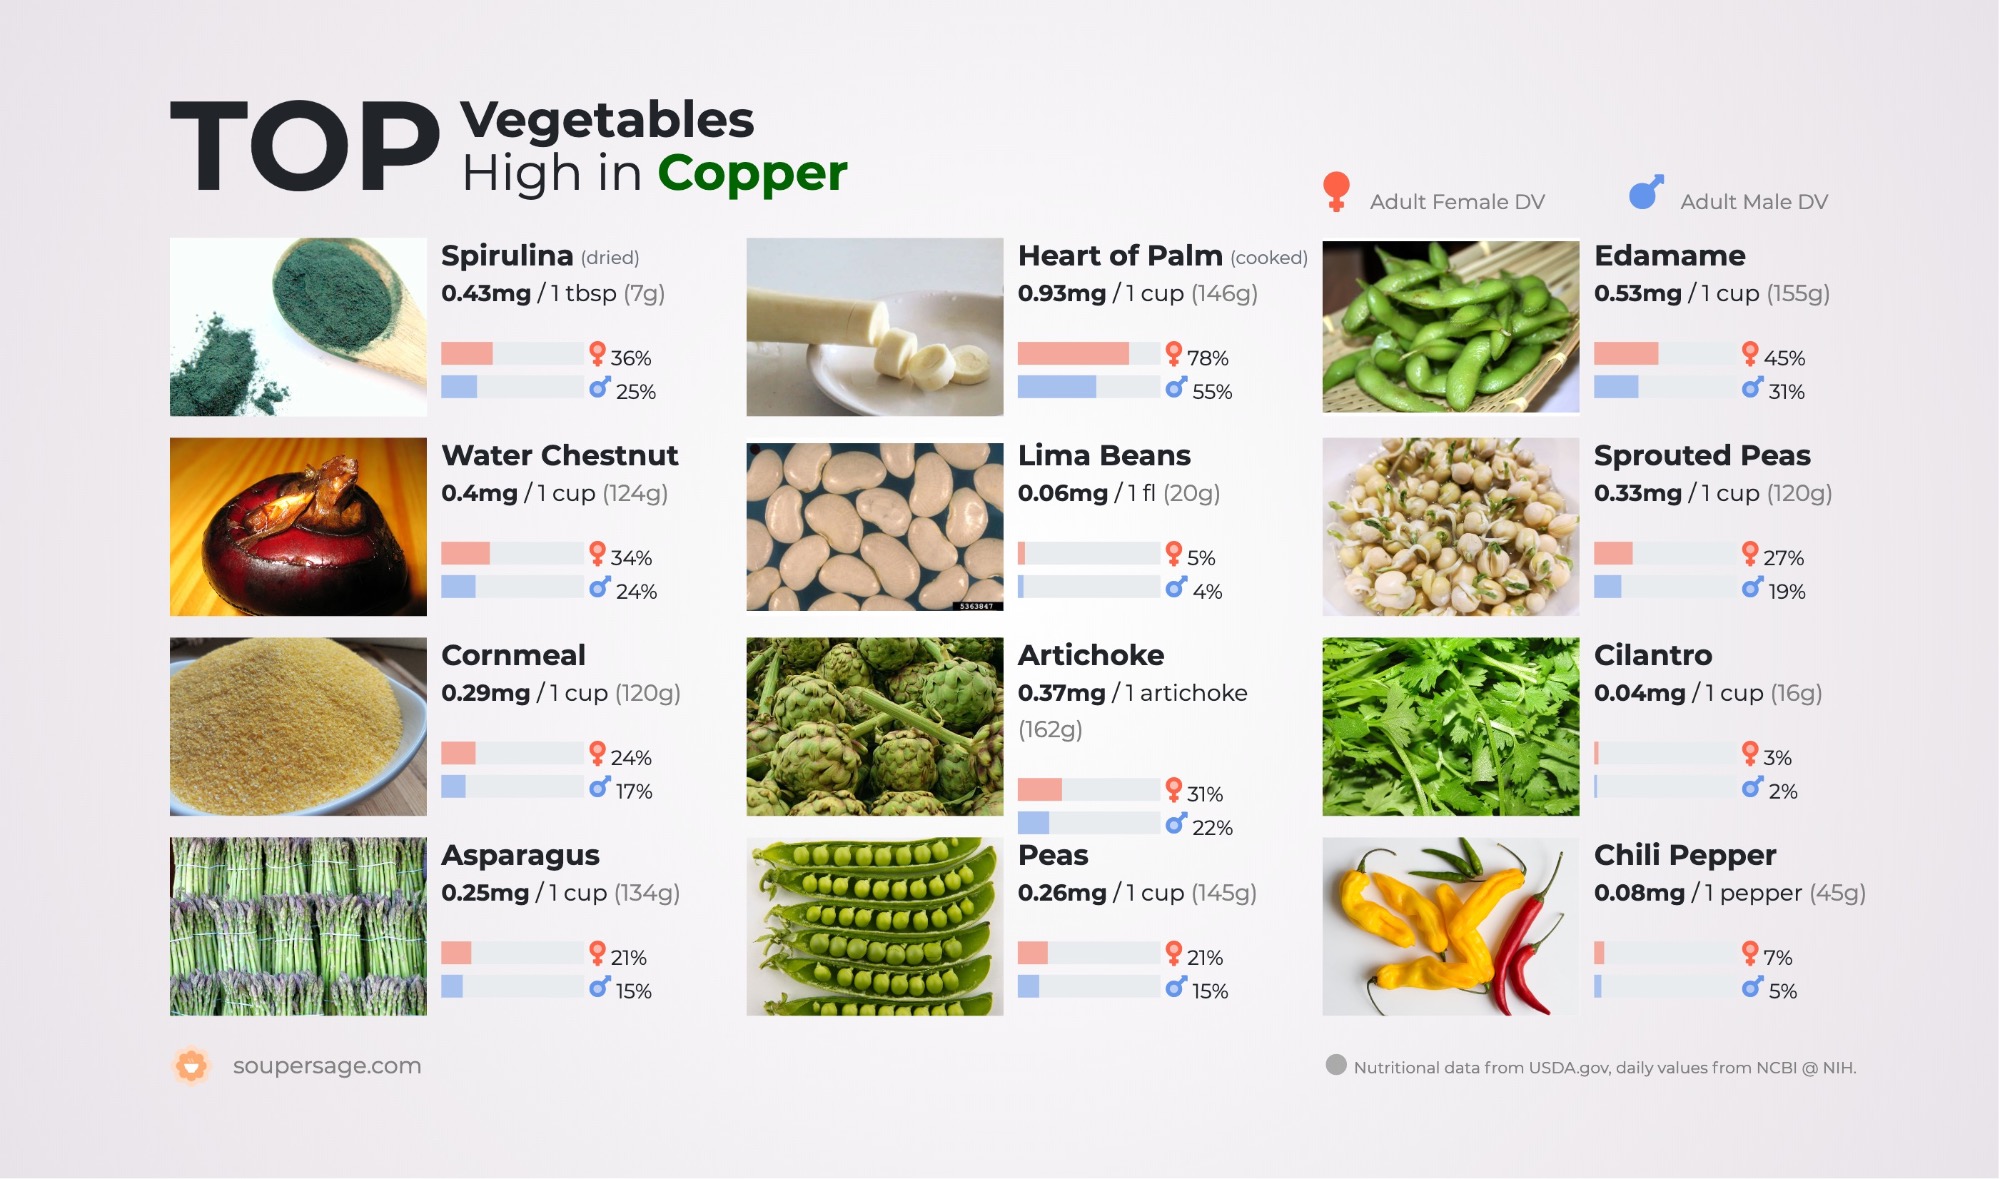 image of Top Vegetables High in Copper